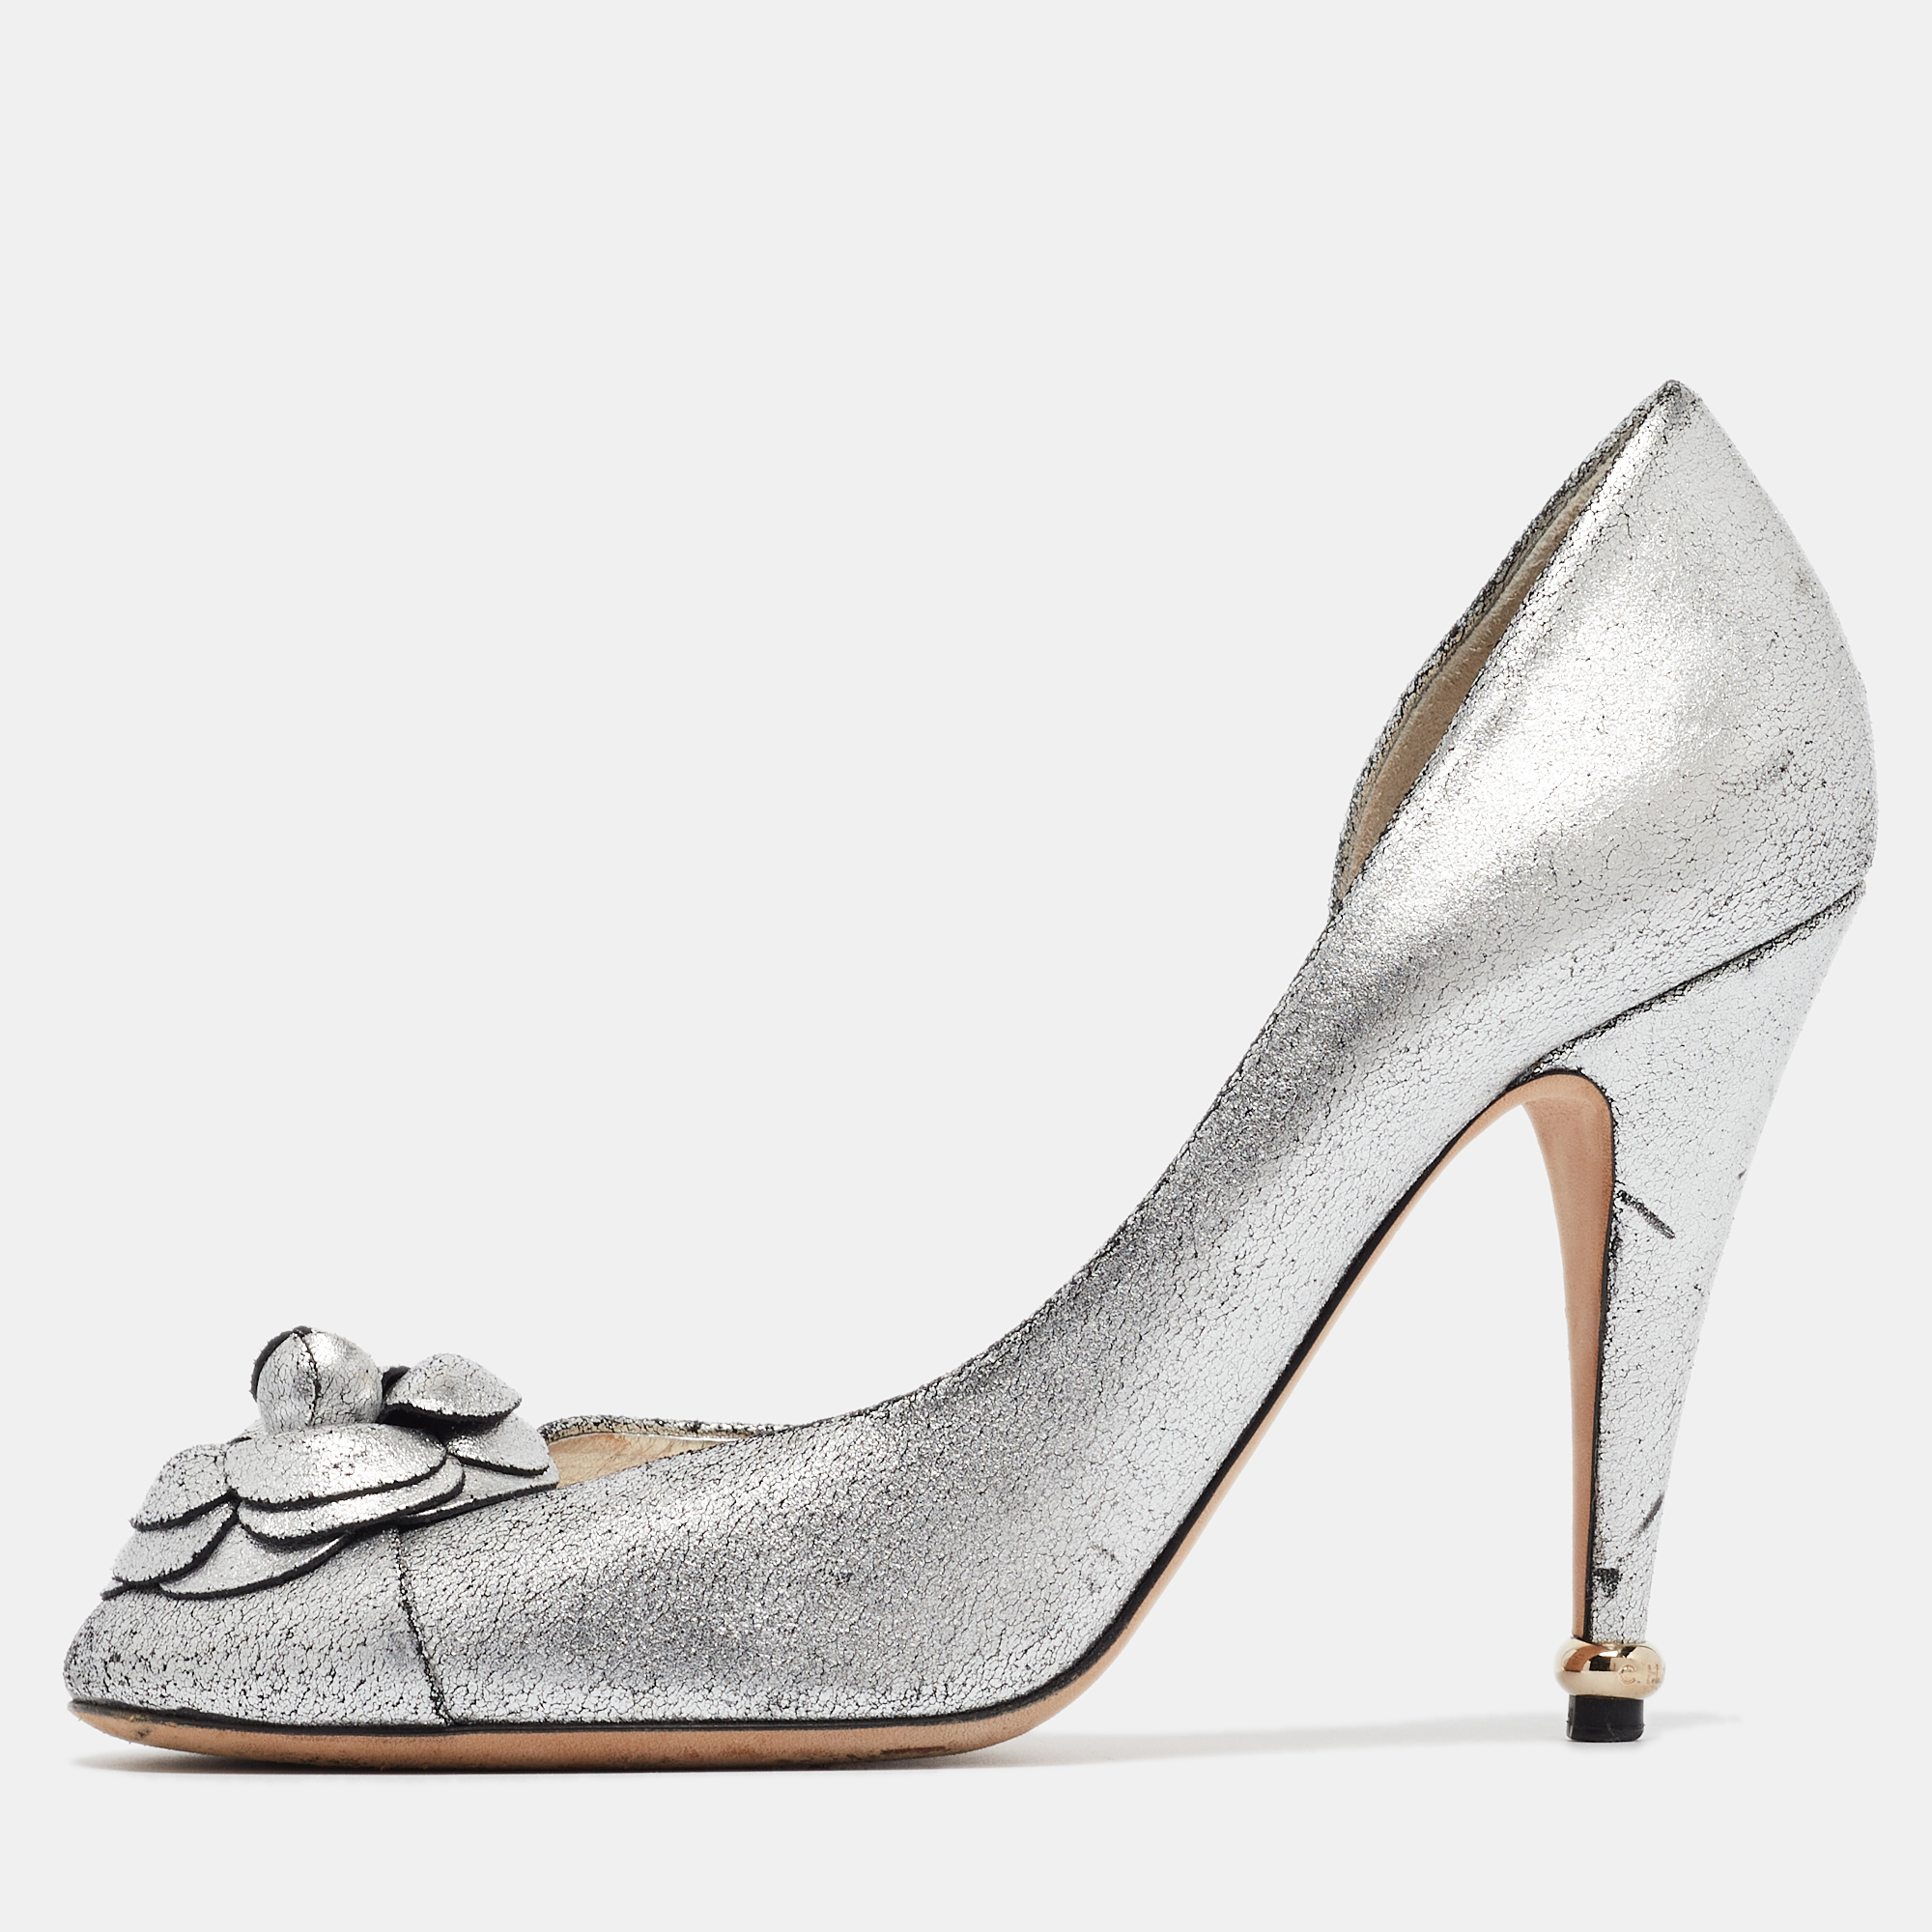 Chanel metallic silver leather camellia d'orsay pumps size 39.5